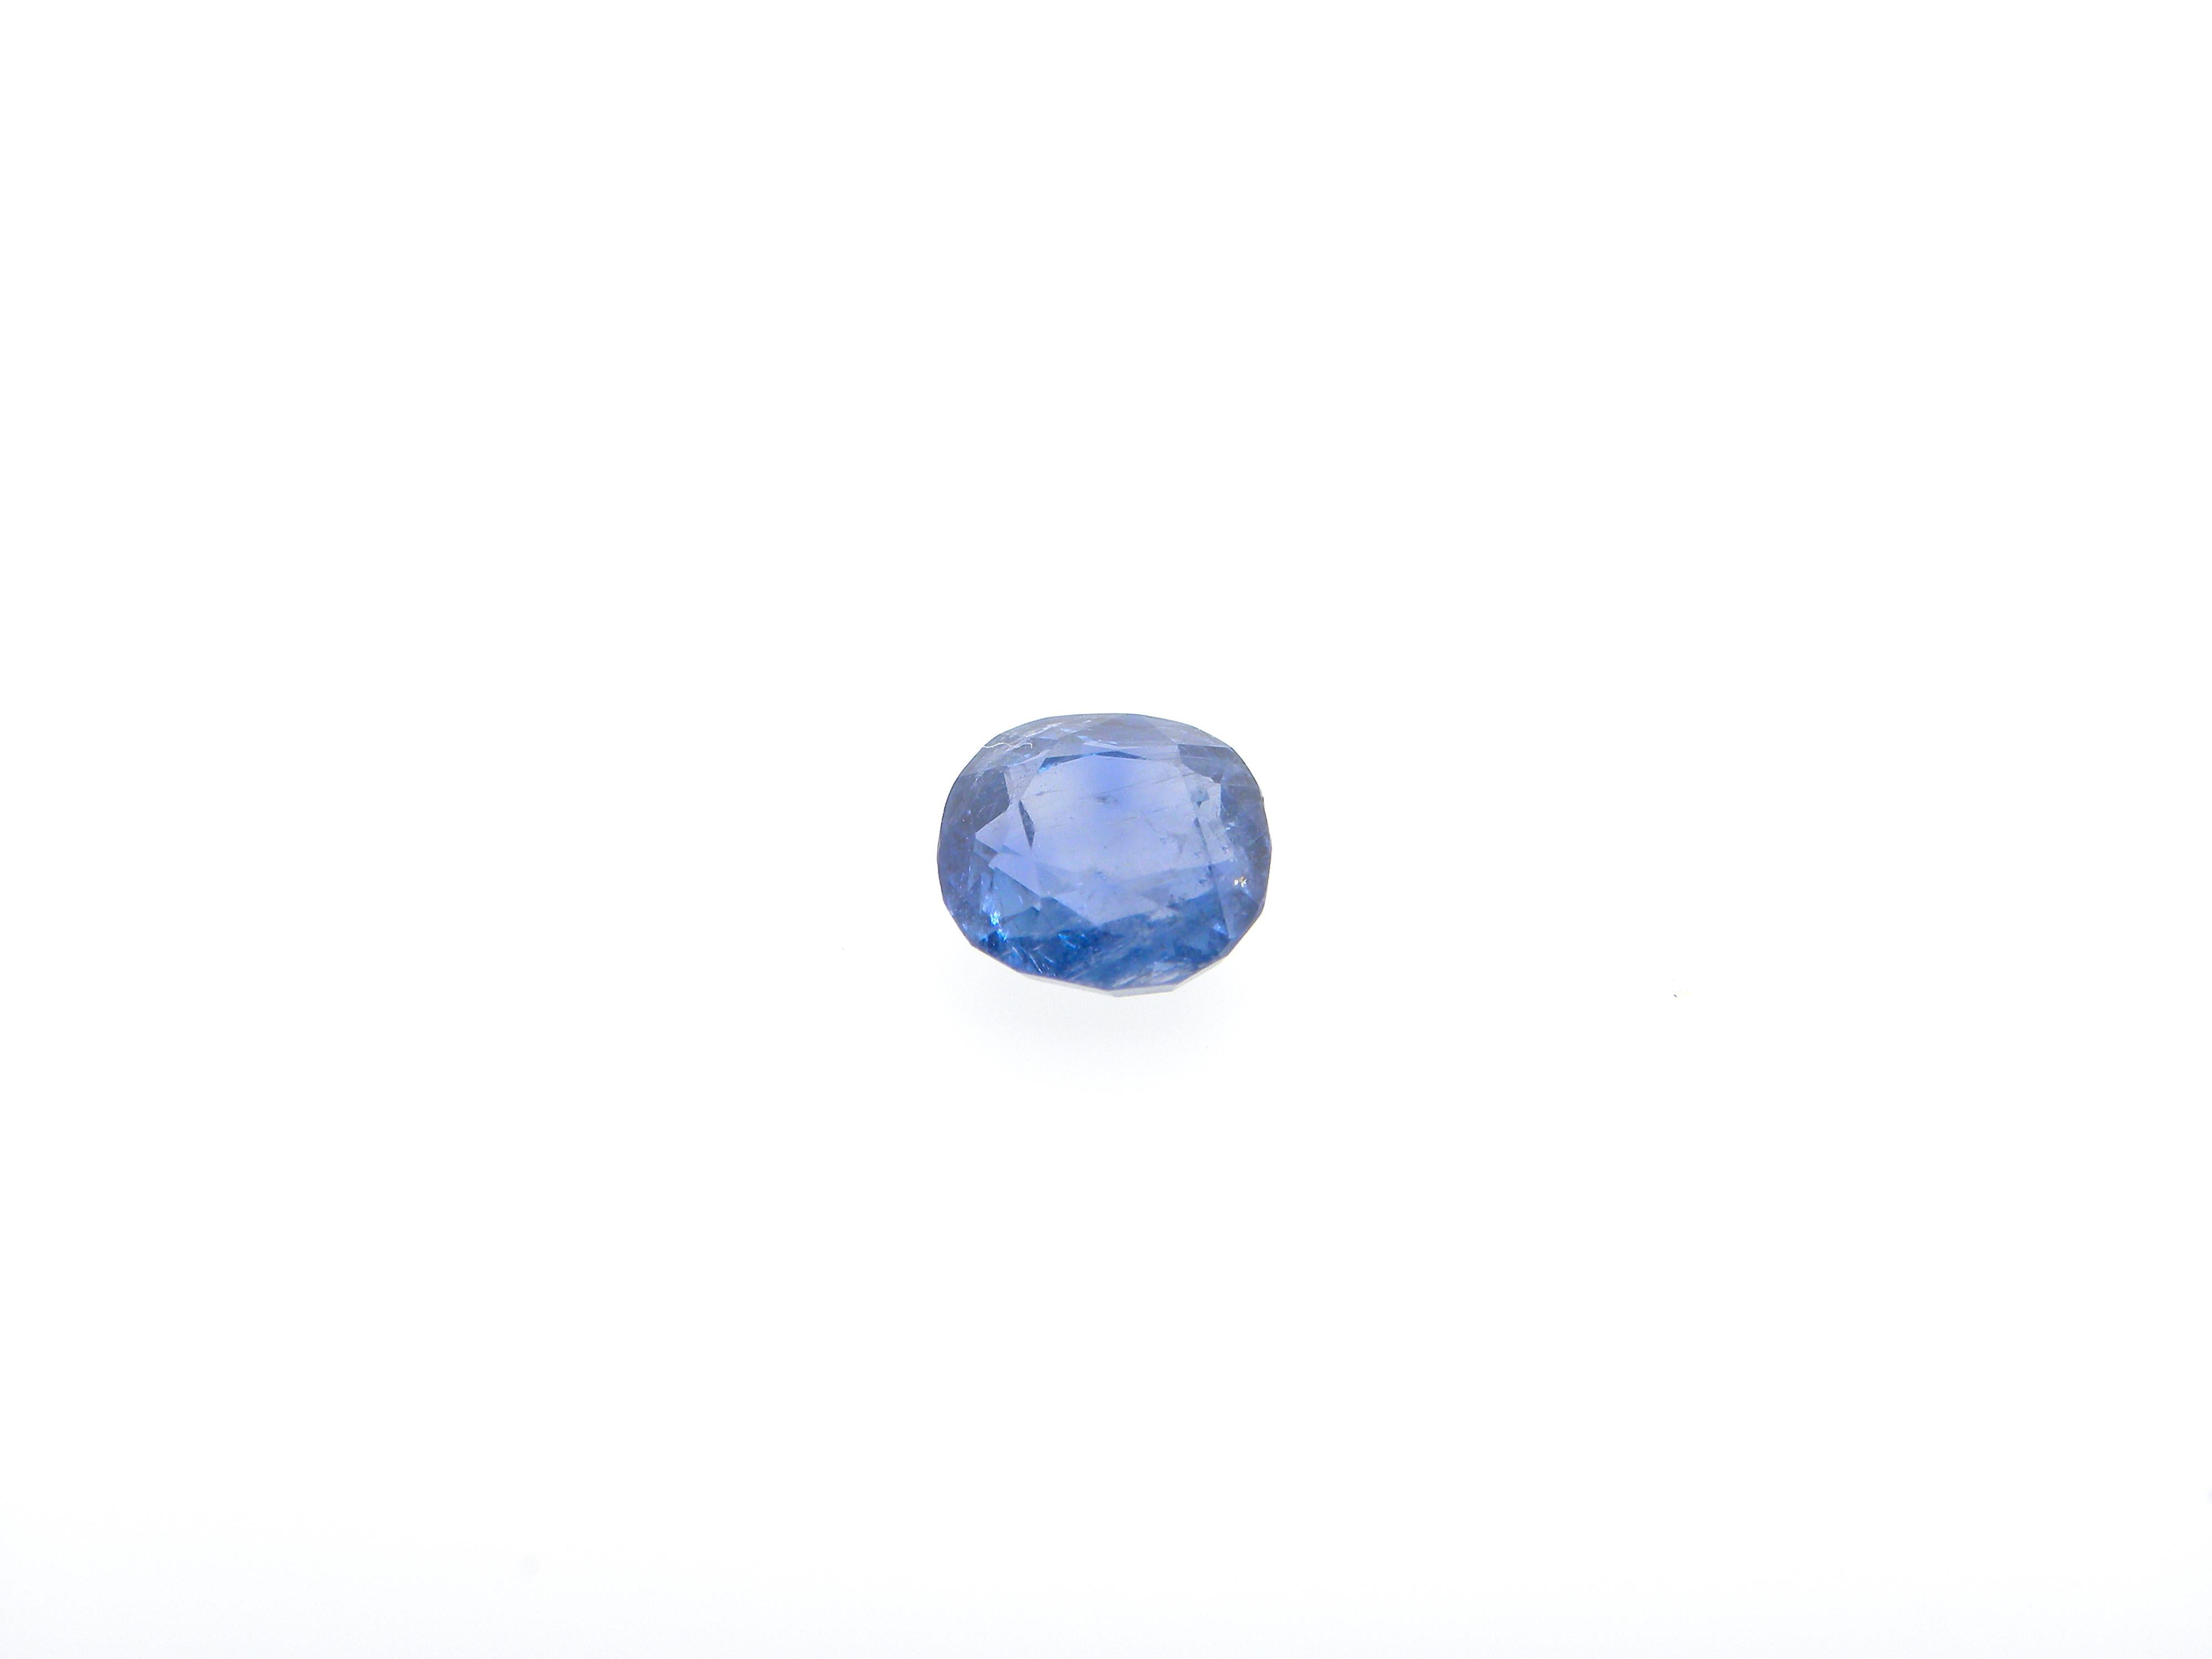 2.13 Carat GIA Certified Natural No Heat Cushion-Cut Blue Sapphire:

A beautiful gem, it is a GIA certified 2.13 carat natural unheated cushion-cut Burmese blue sapphire. Hailing from the important Mogok stone tract in Burma, the sapphire possesses